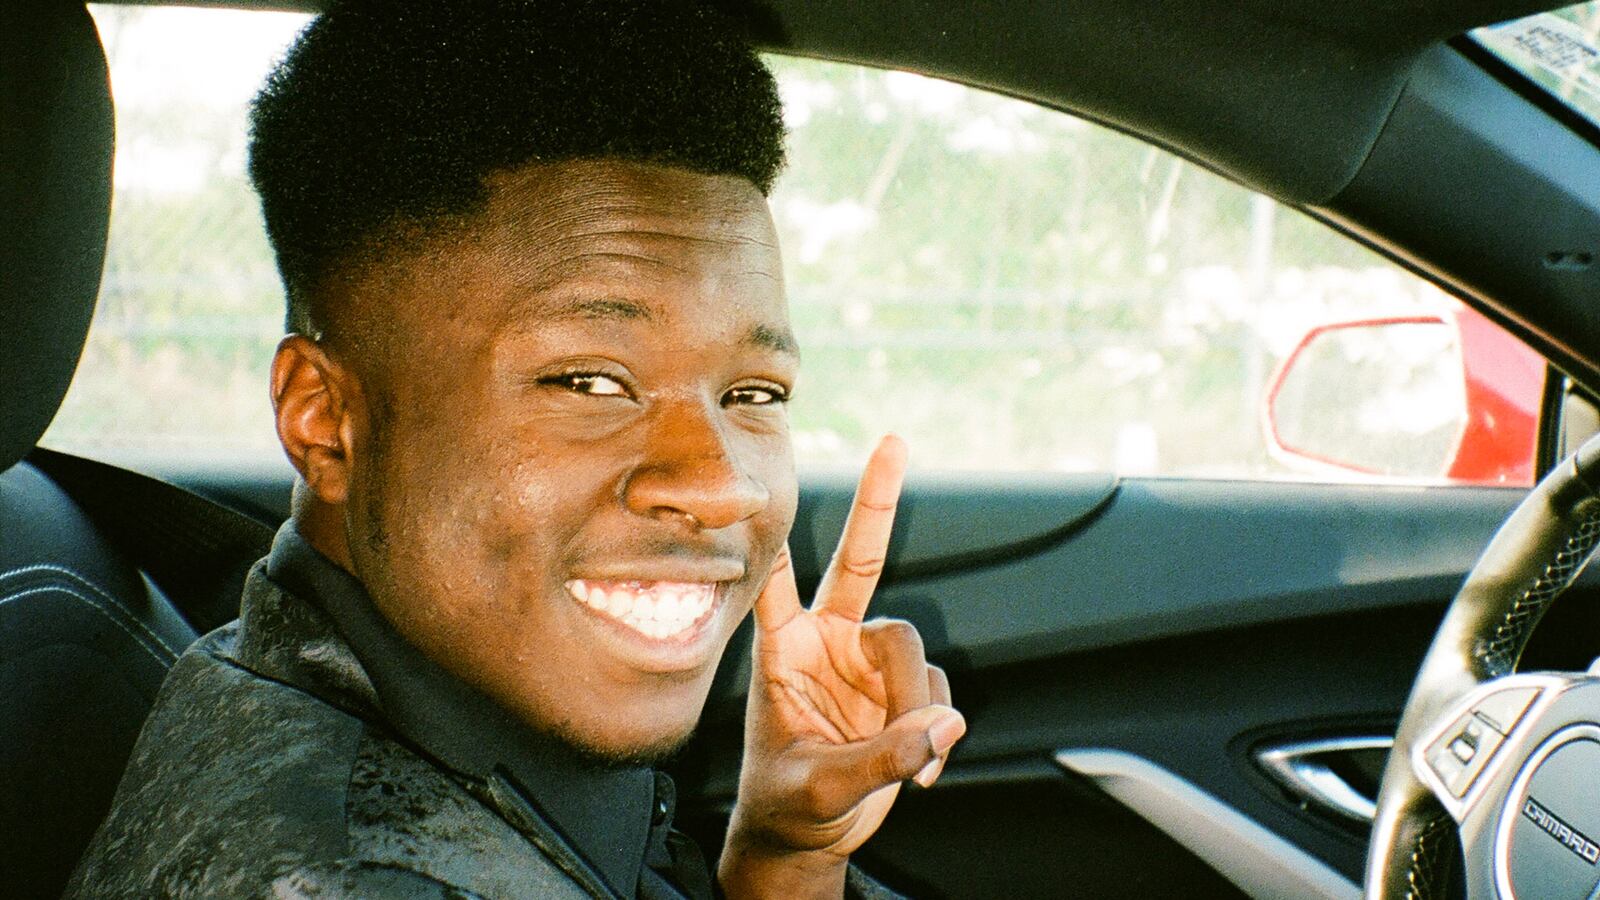 A young man wearing a black tuxedo smiles and flashes a peace sign in the driver’s seat of a car.